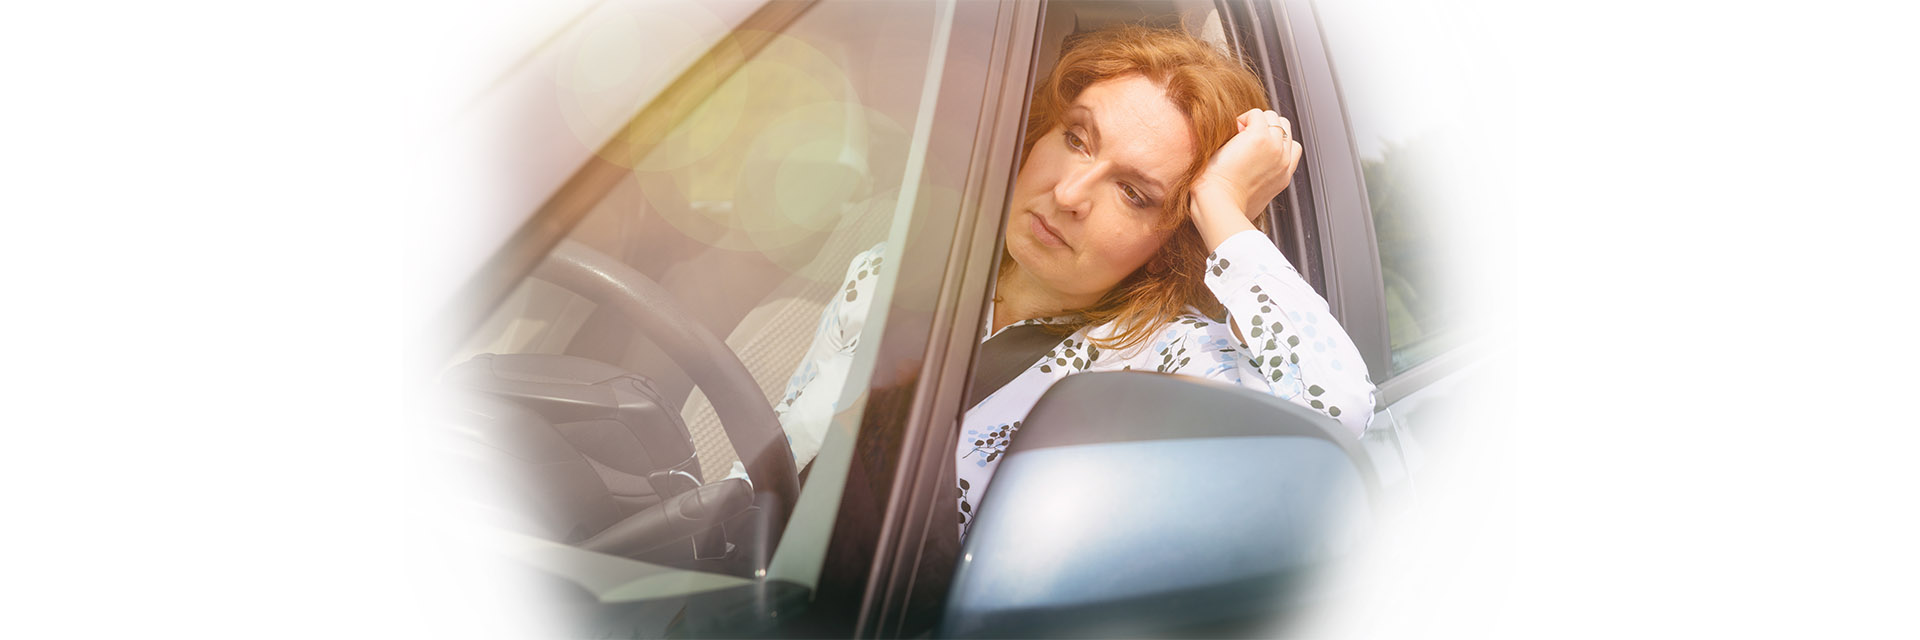 Stressed woman in the car